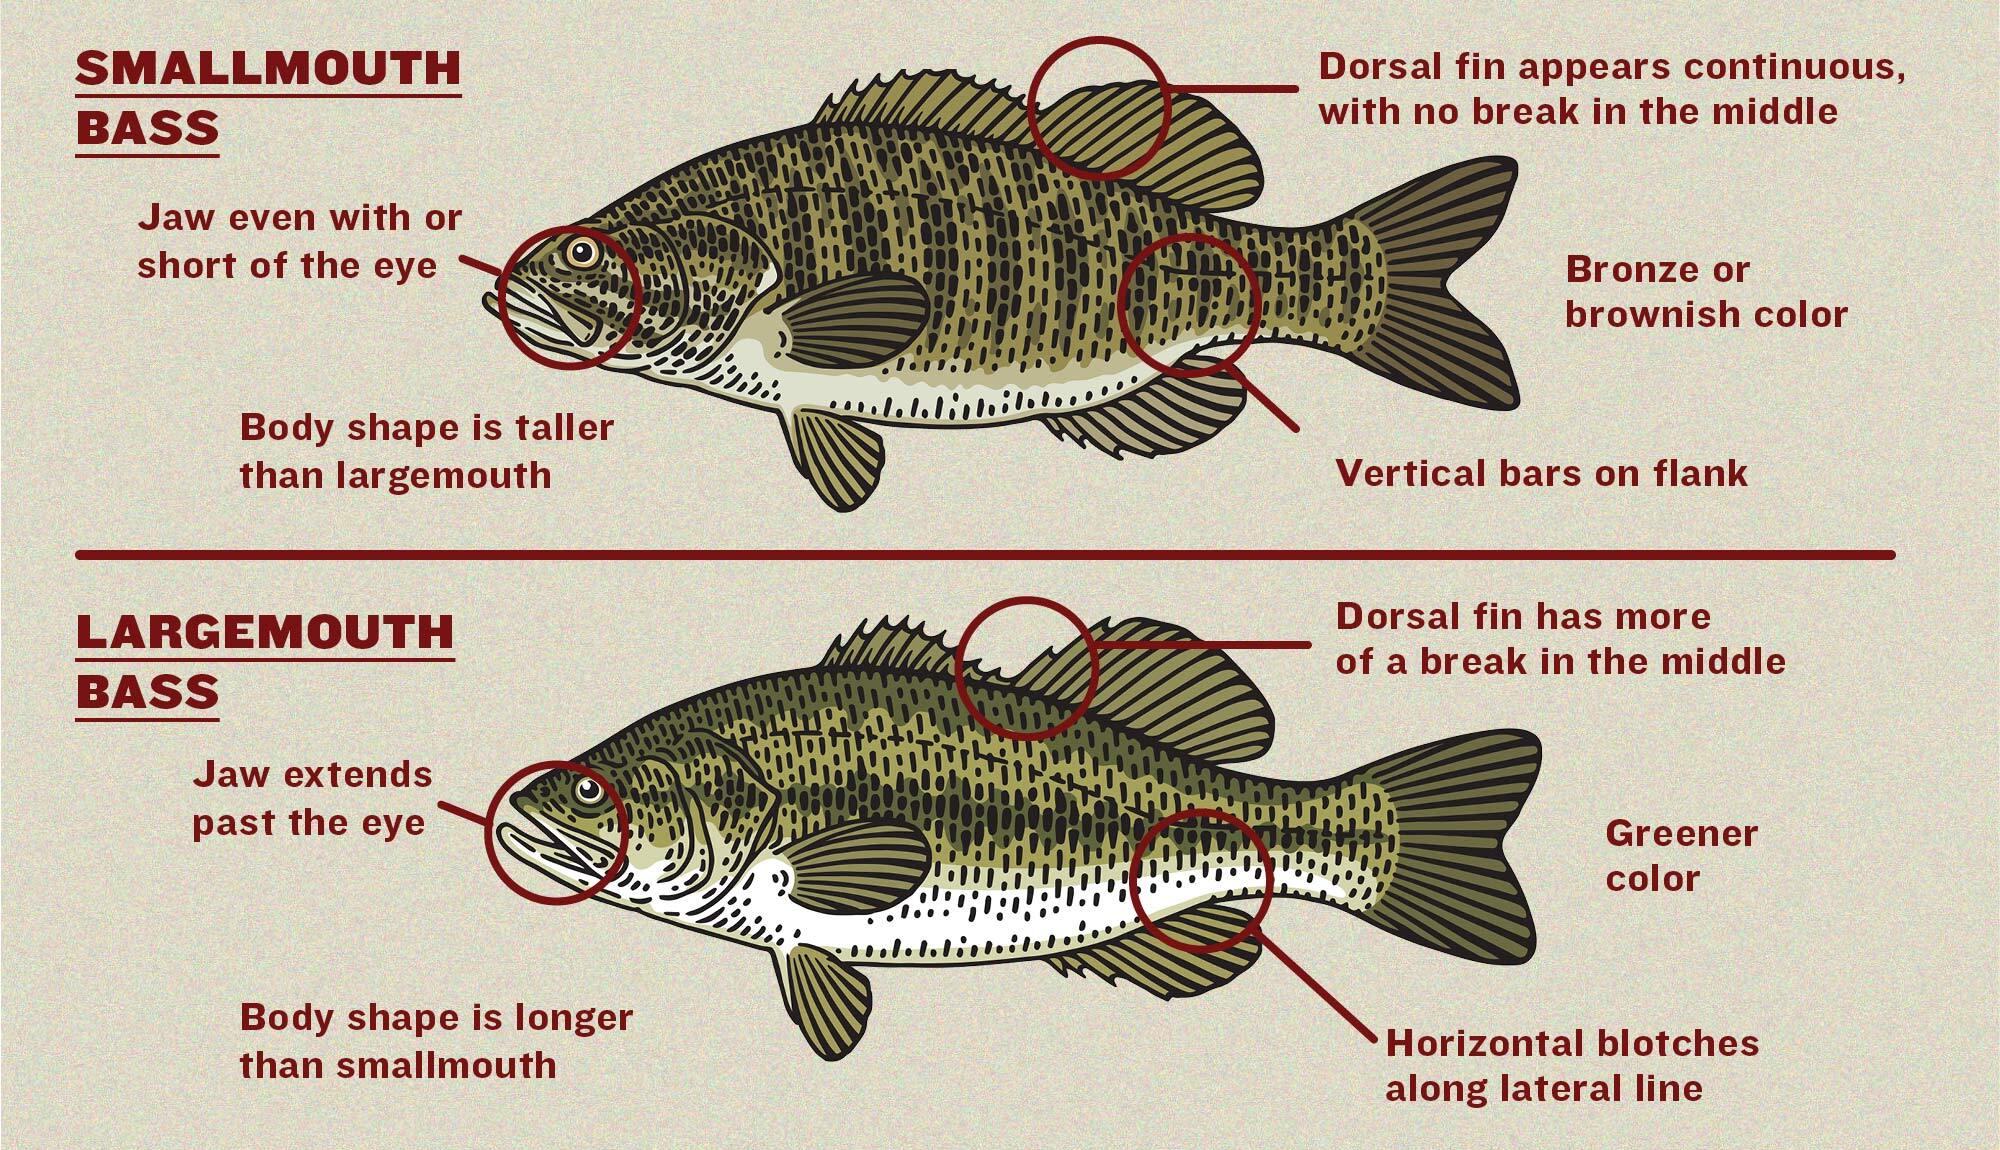 illustration showing how to identify smallmouth vs largemouth bass